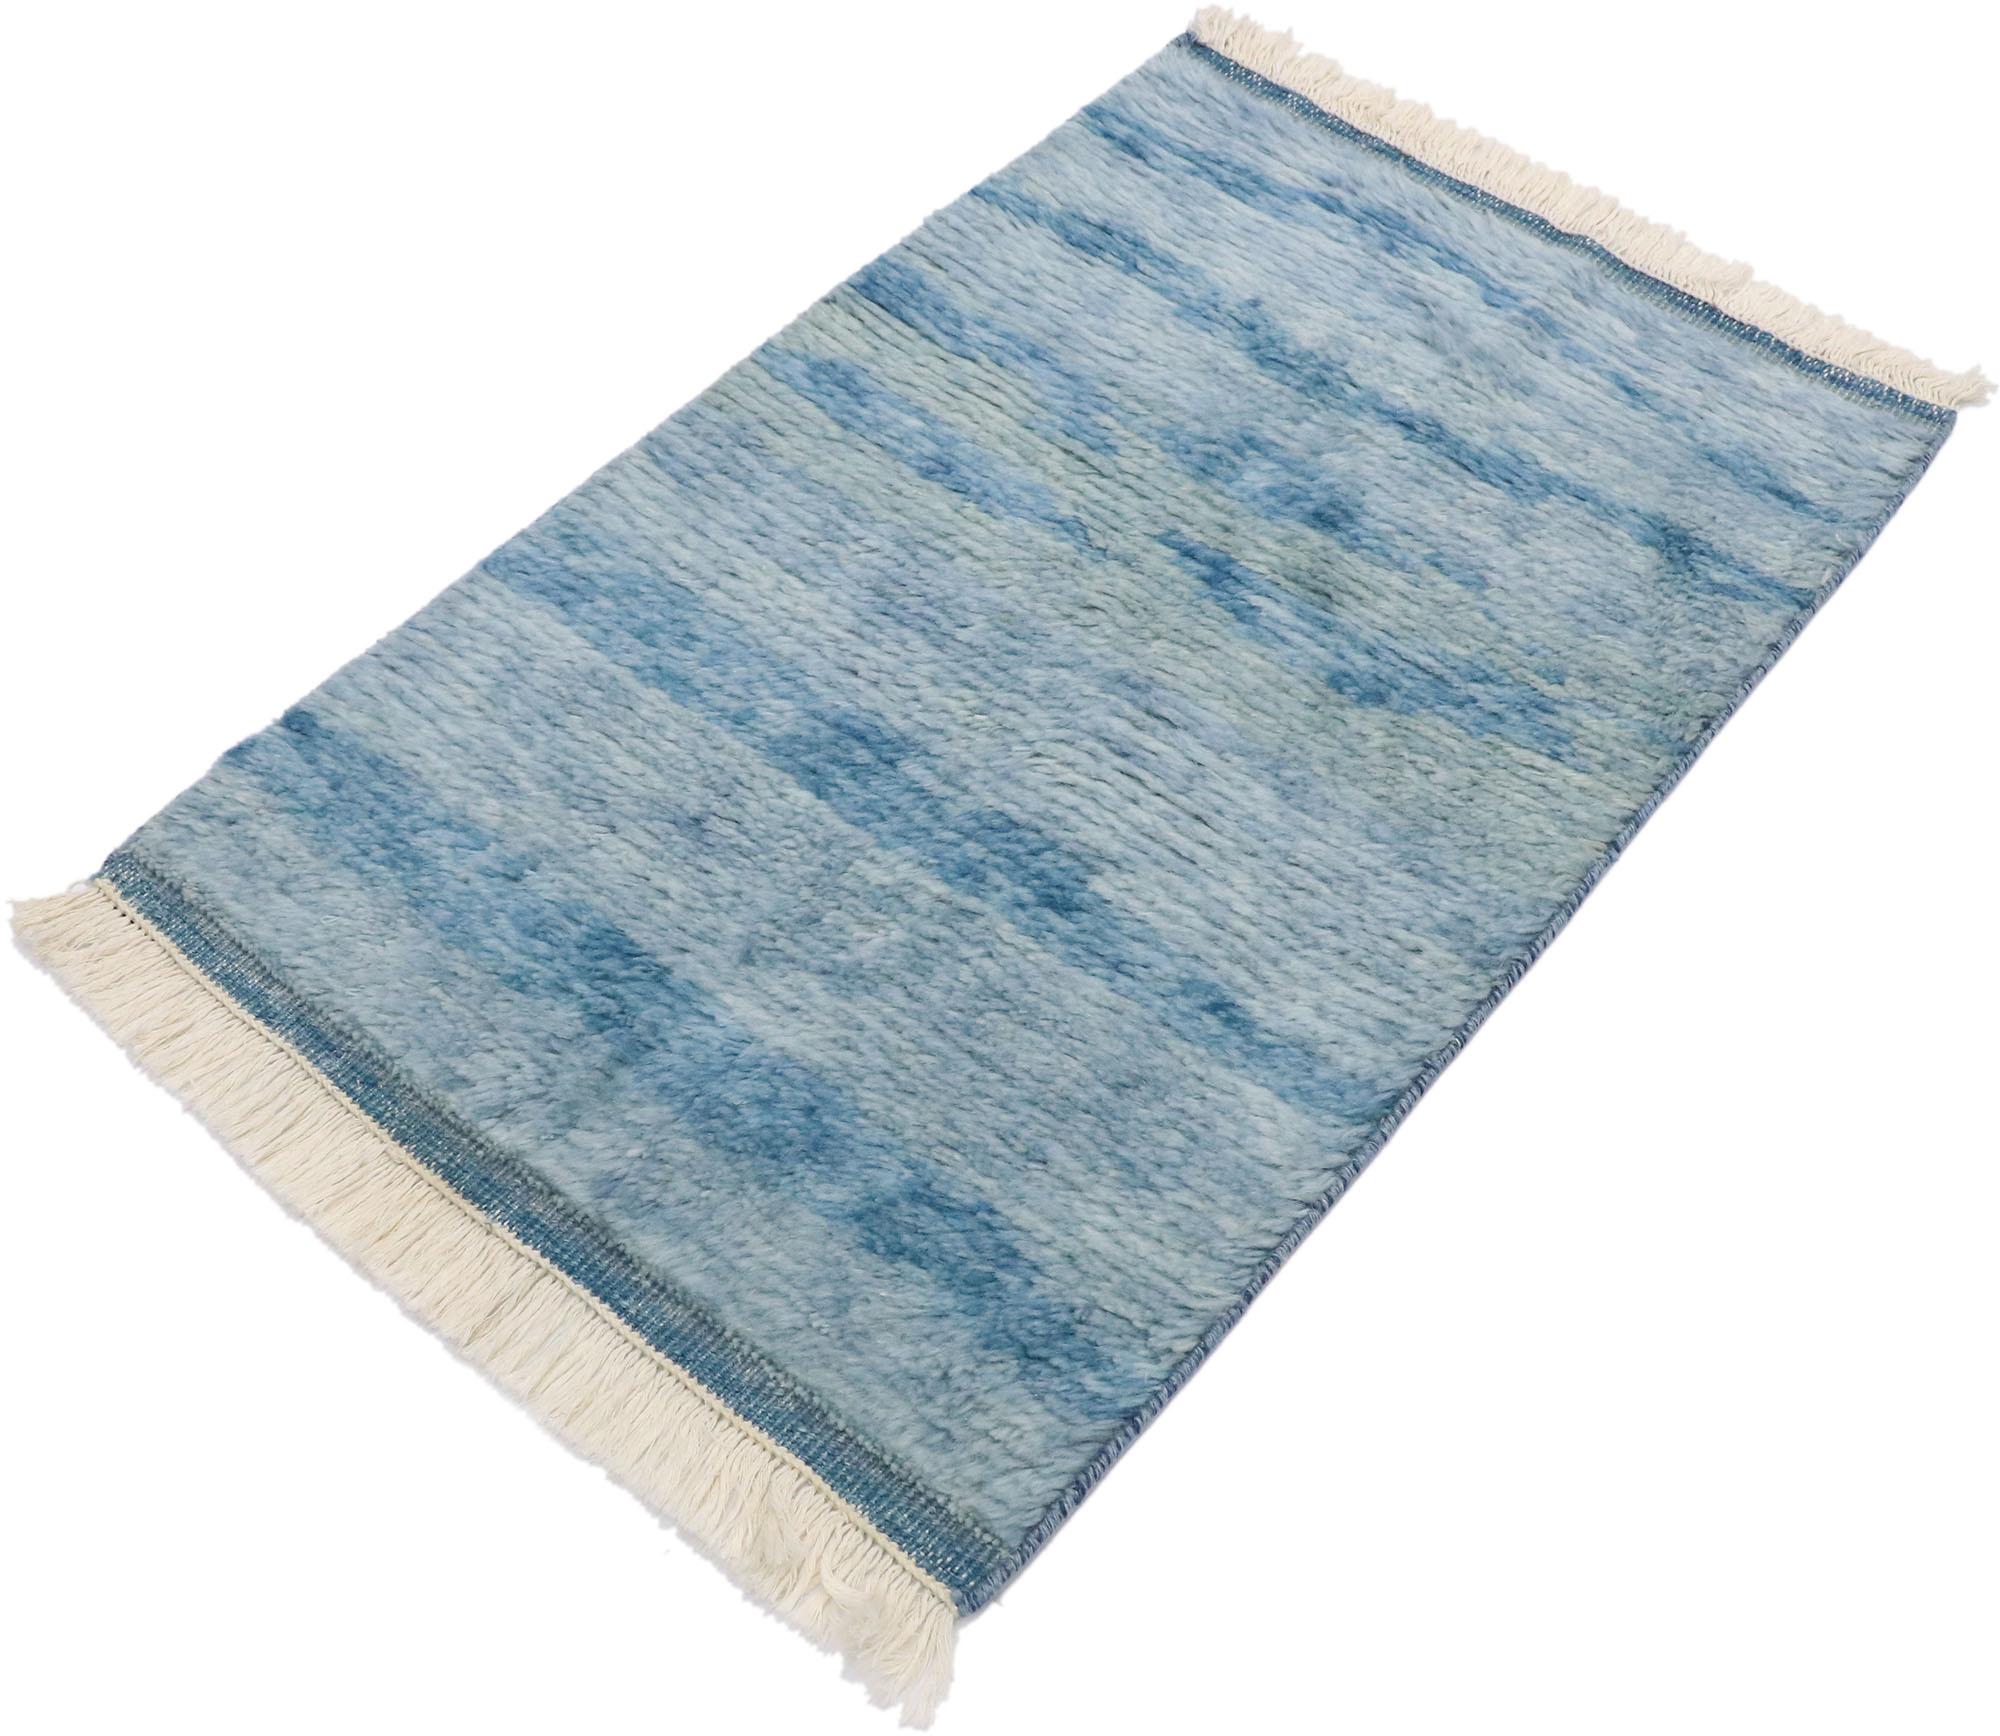 30604, new contemporary Moroccan Beach rug with Modern Coastal style. This hand knotted wool contemporary Moroccan rug features a luminous aqua toned color palette and wonderfully soft pile. Gorgeous waves of abrash and ombre movements between rich